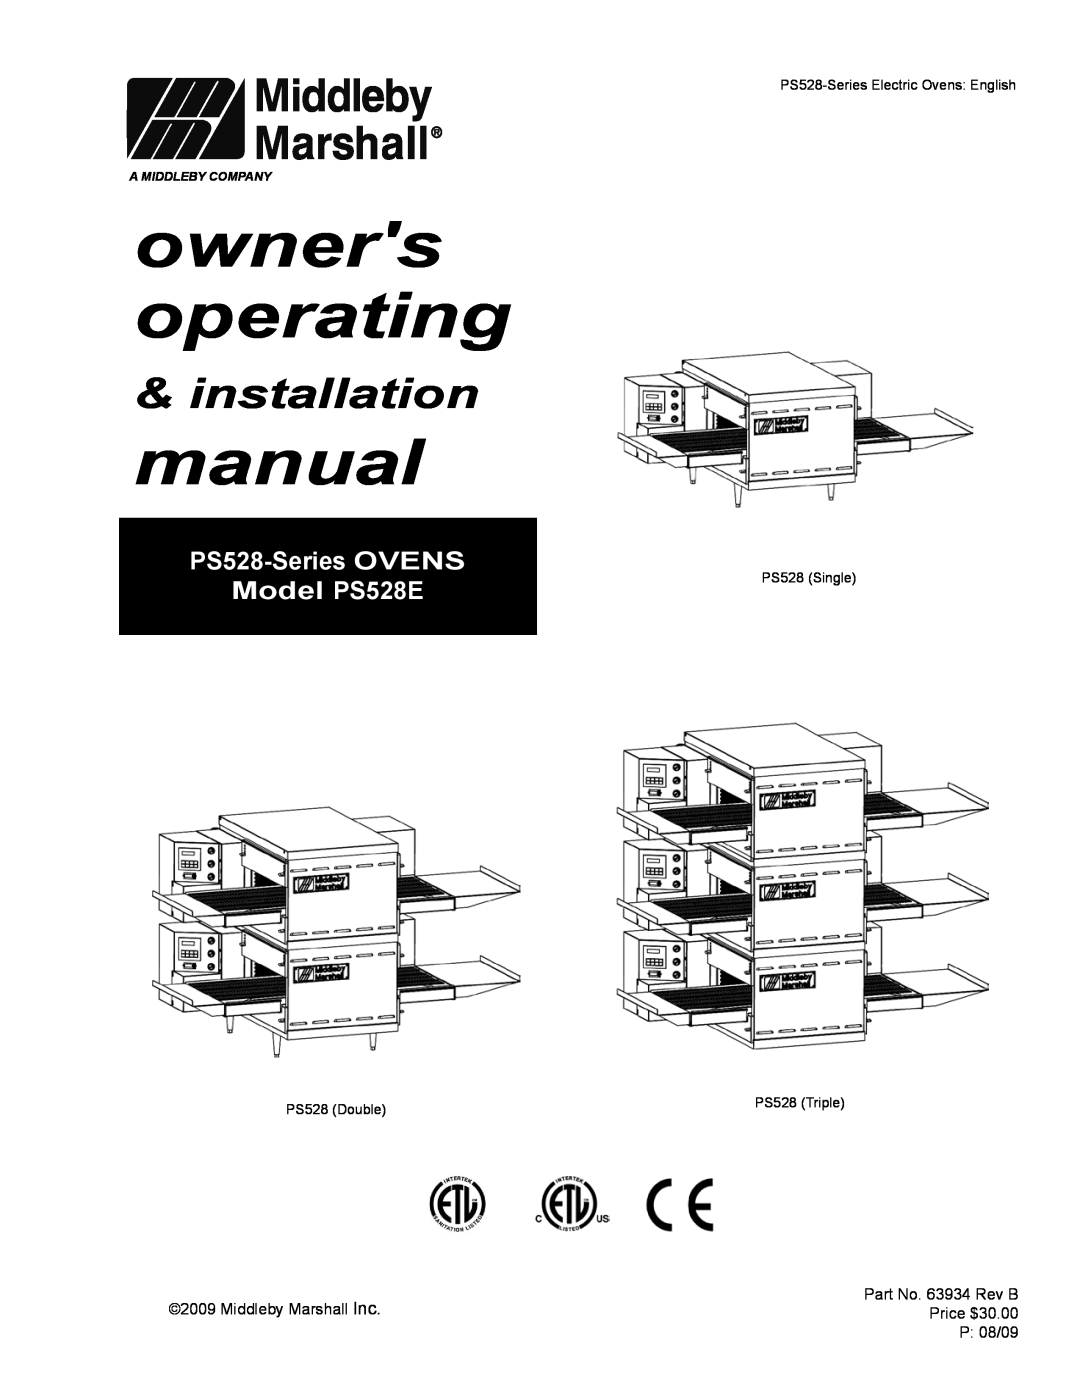 Middleby Marshall PS528 (Double) installation manual owners operating, PS528-Series OVENS Model PS528E, A Middleby Company 